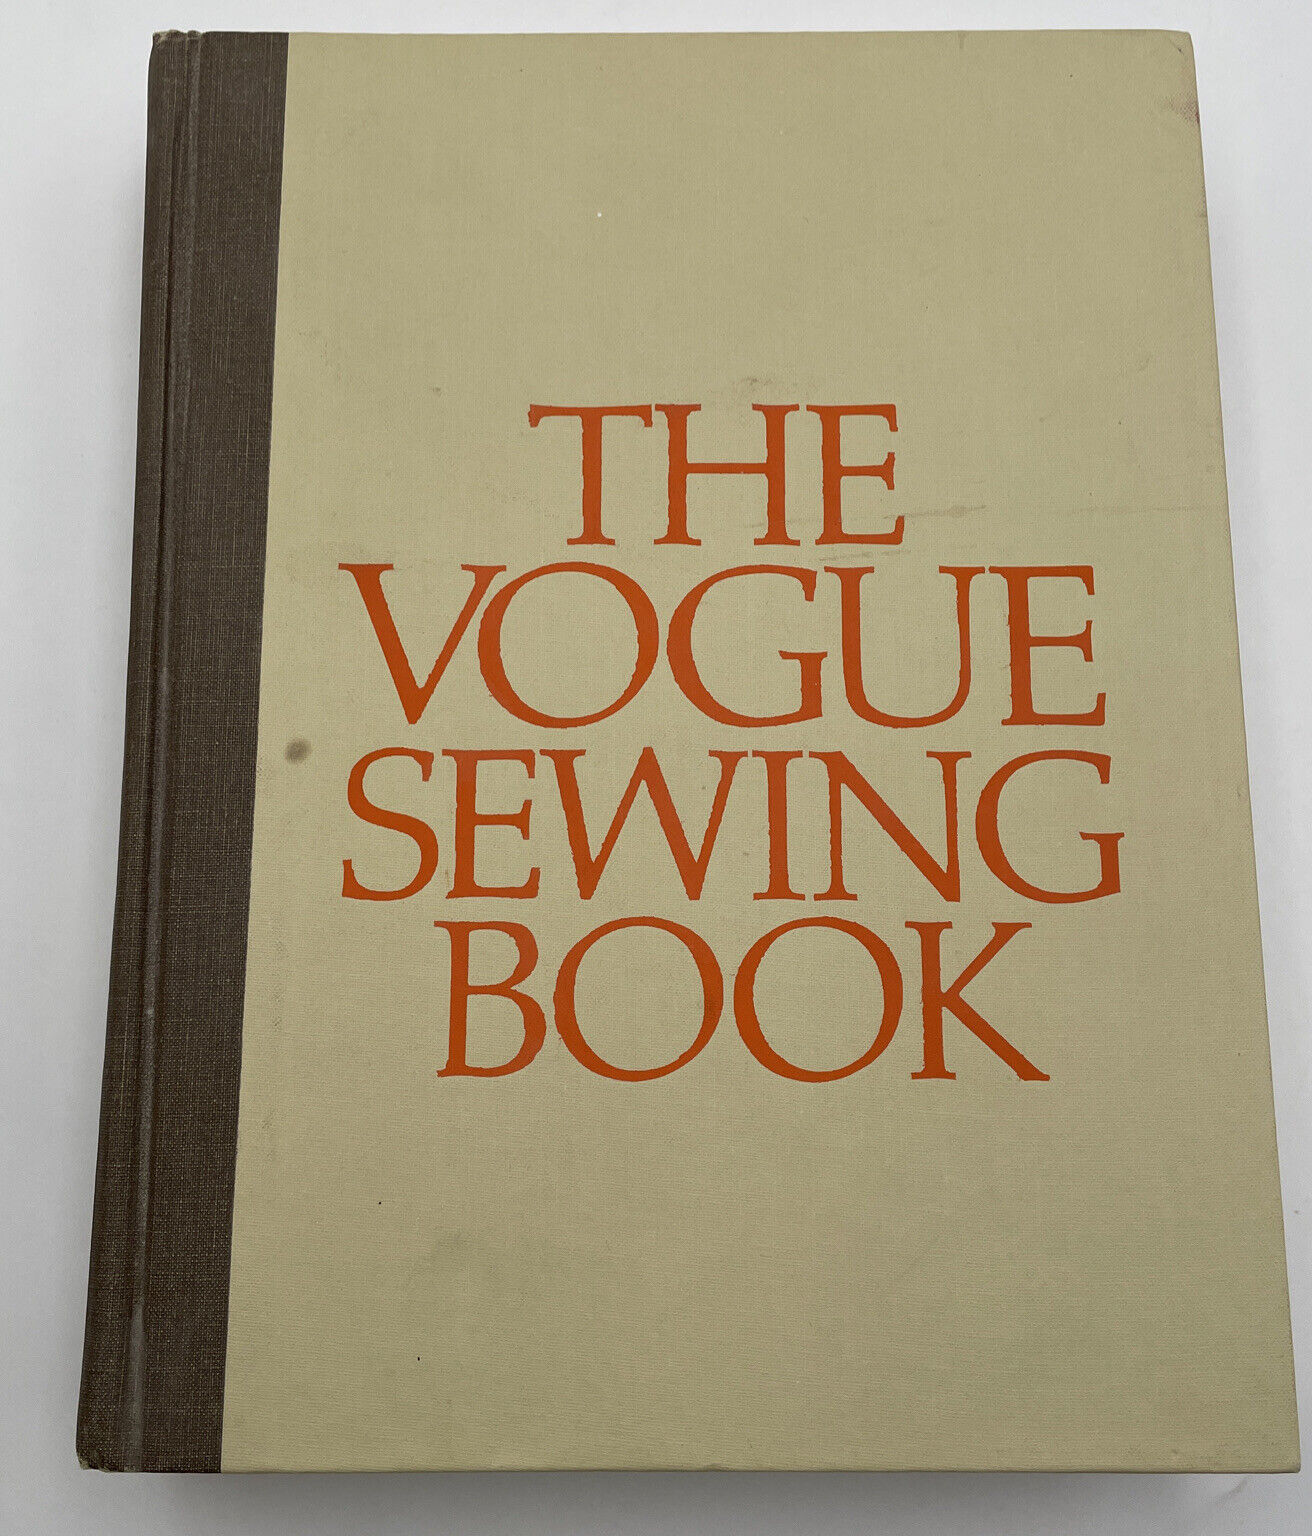 THE VOGUE SEWING BOOK by Patricia Perry 1973 2nd Edition  NO BOX